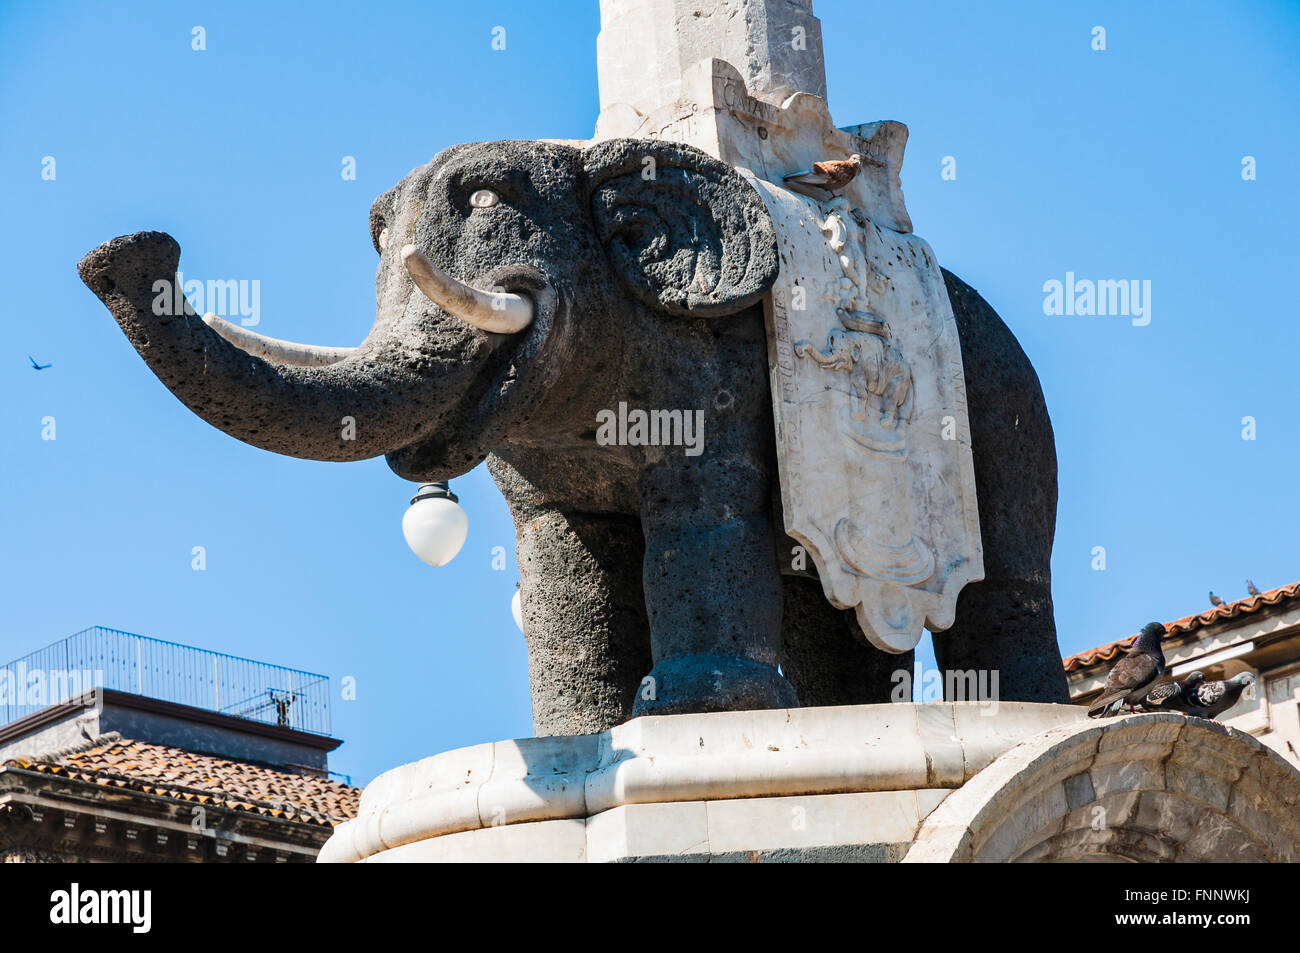 The iconic elephant made of lava in the middle of Piazza Duomo, the symbol of Catania. Stock Photo